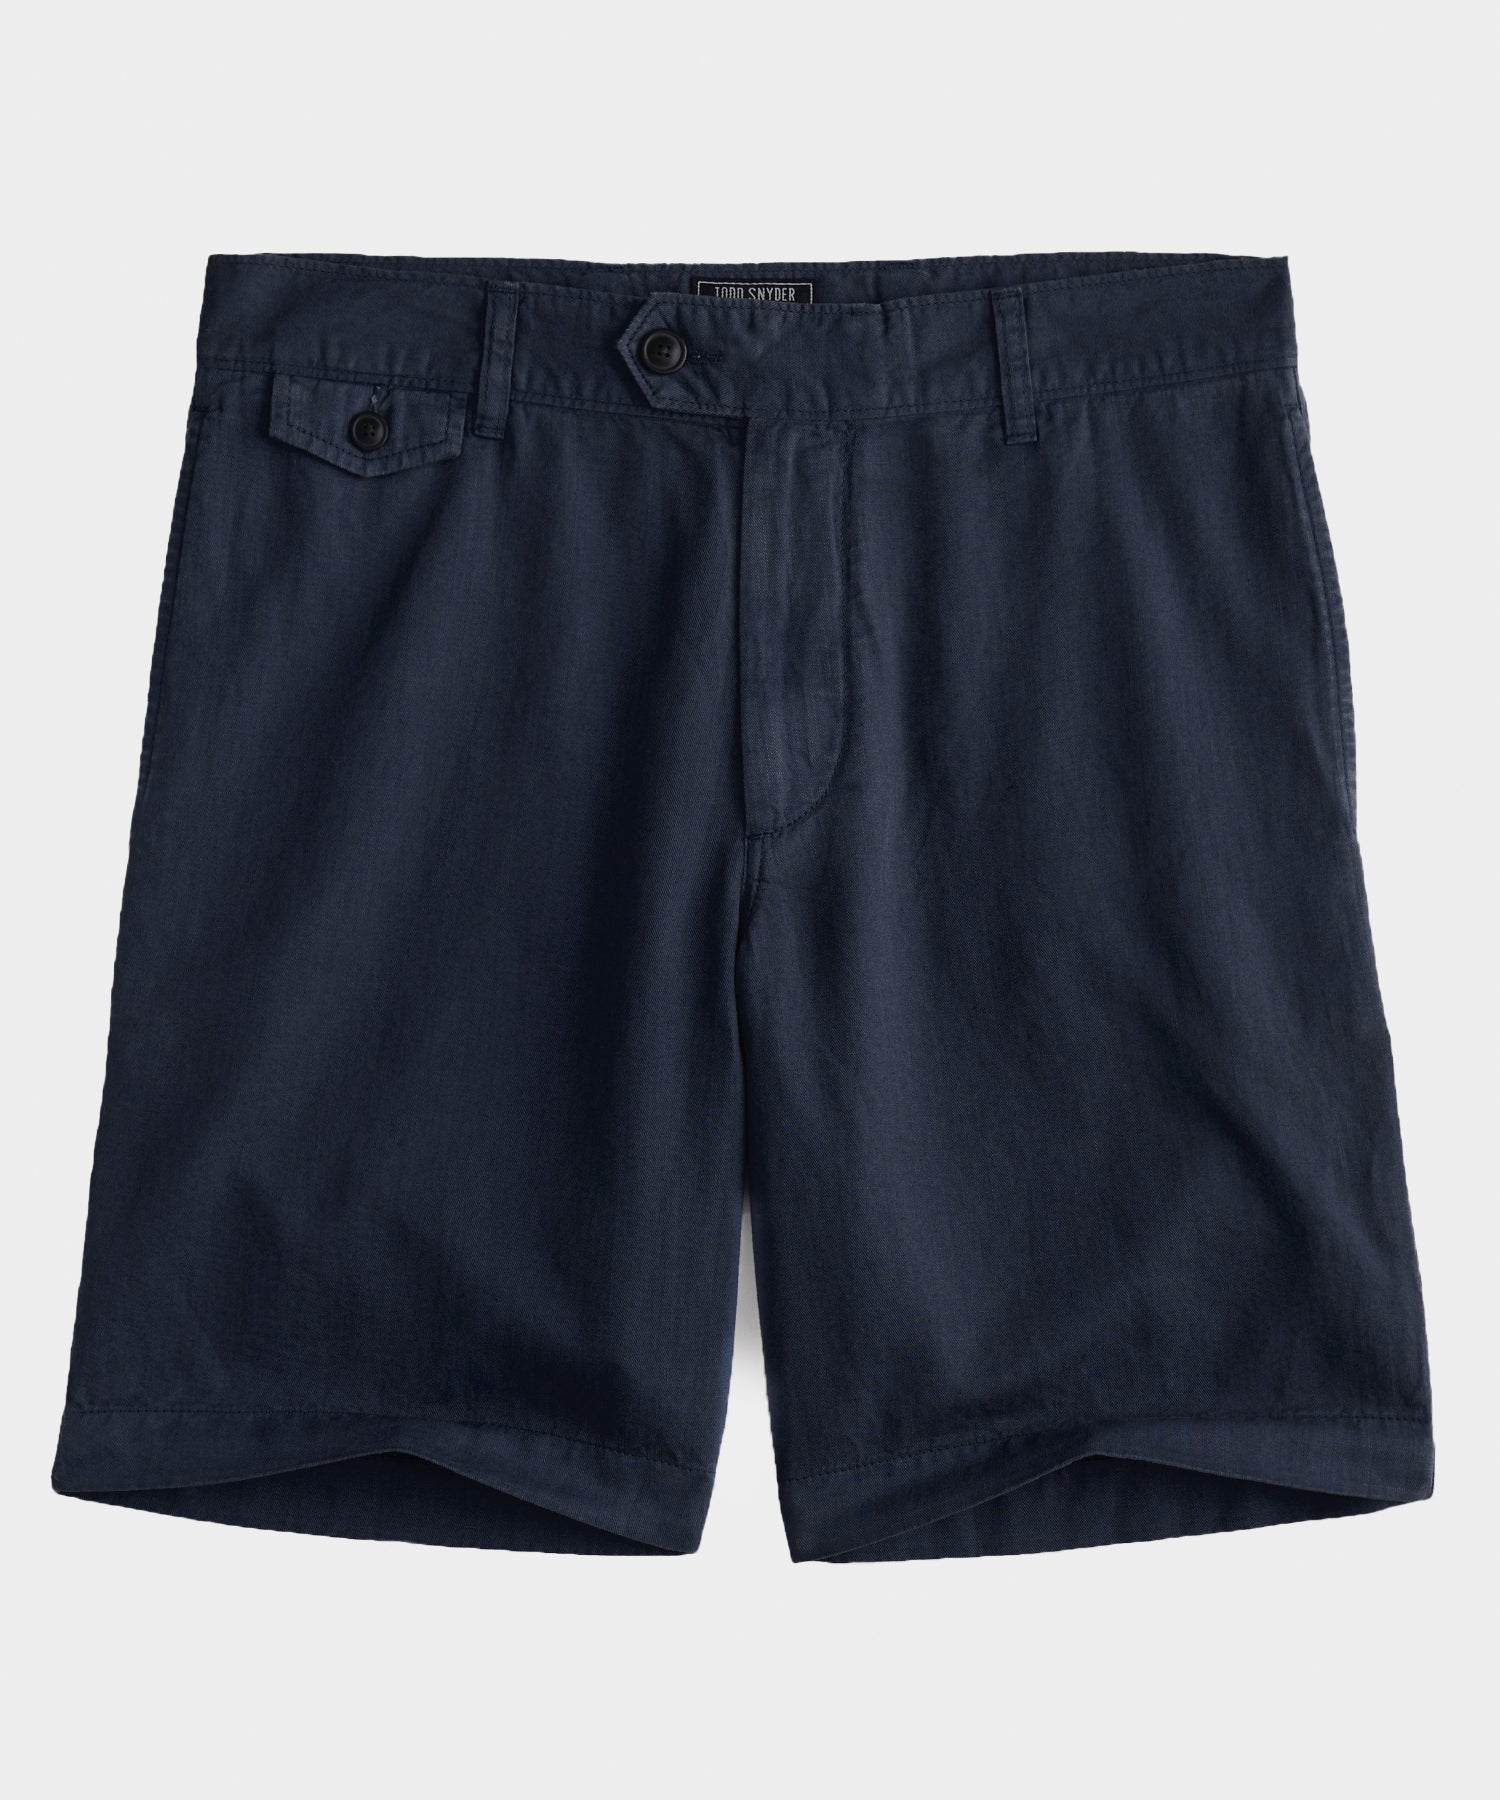 9" Inseam and Longer Shorts